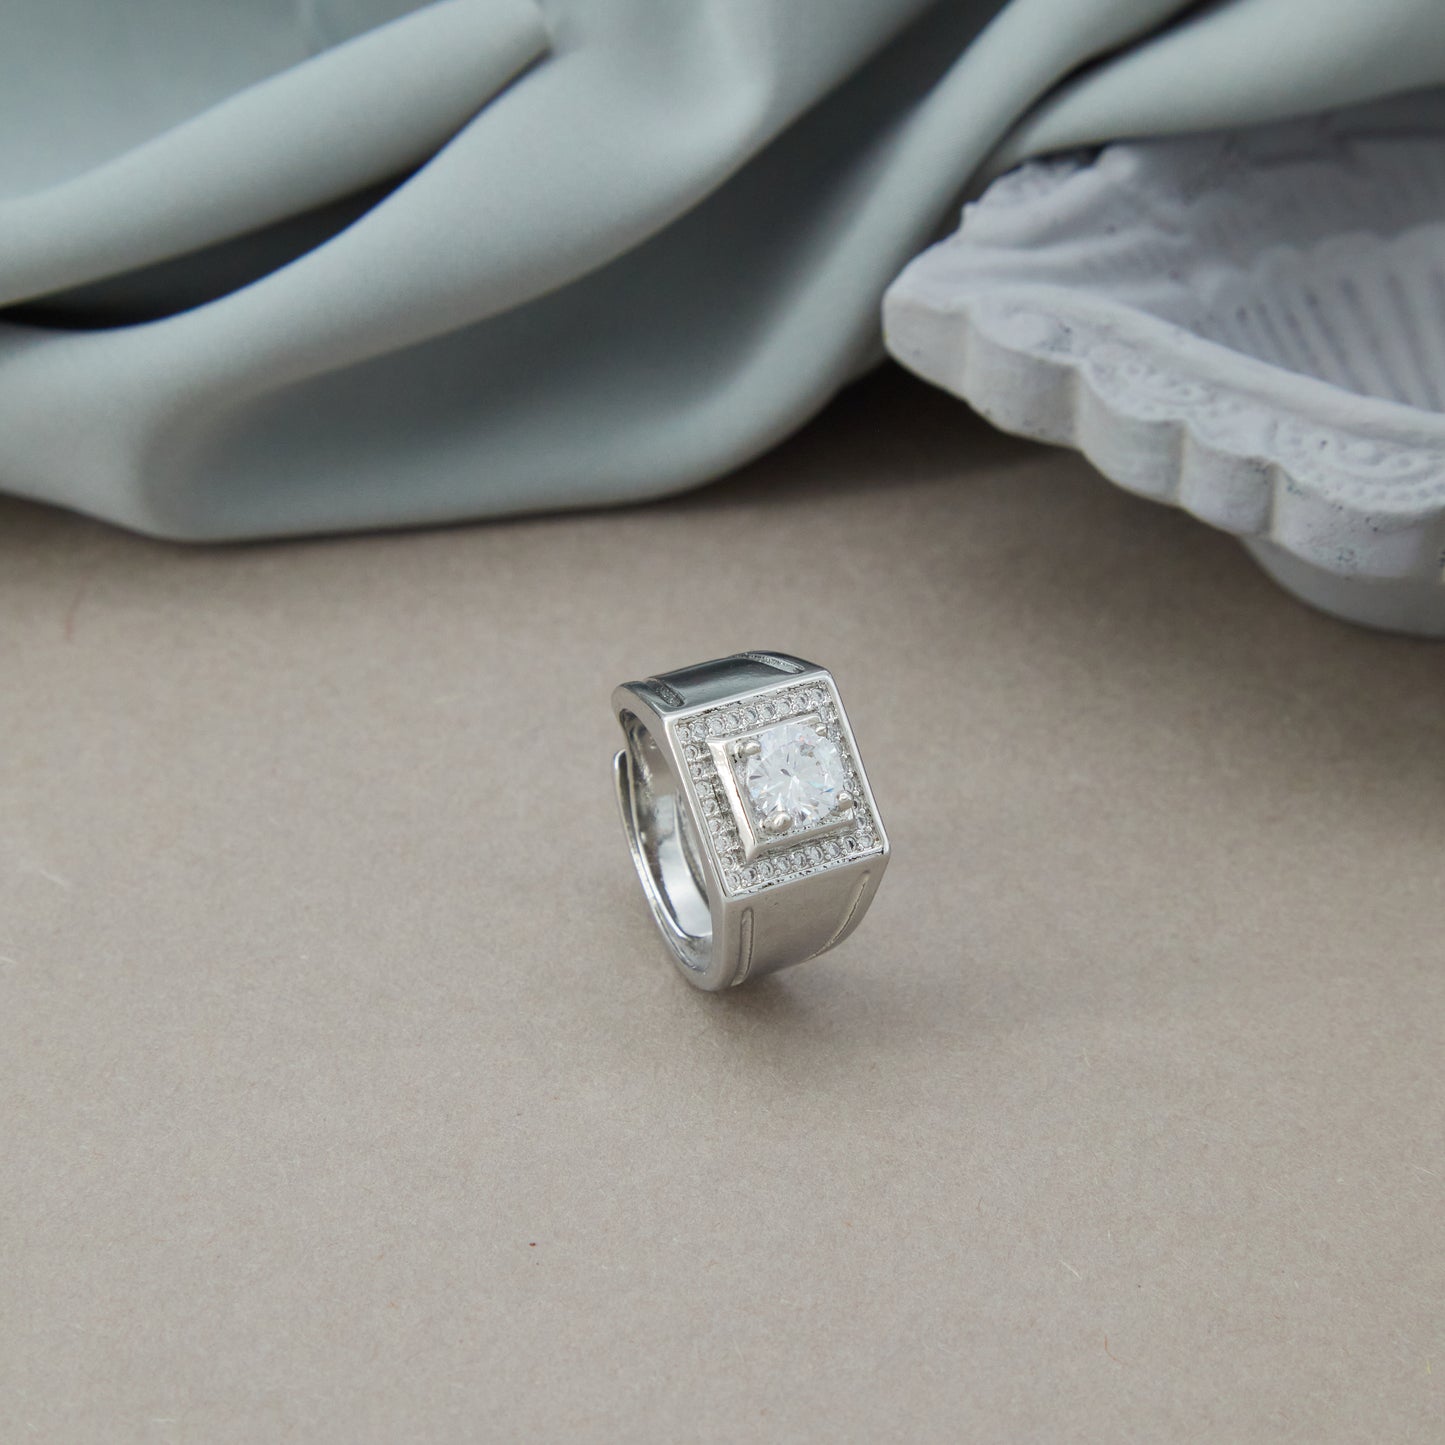 SILVER PLATED DIAMOND ADJUSTABLE RING SPWDR004